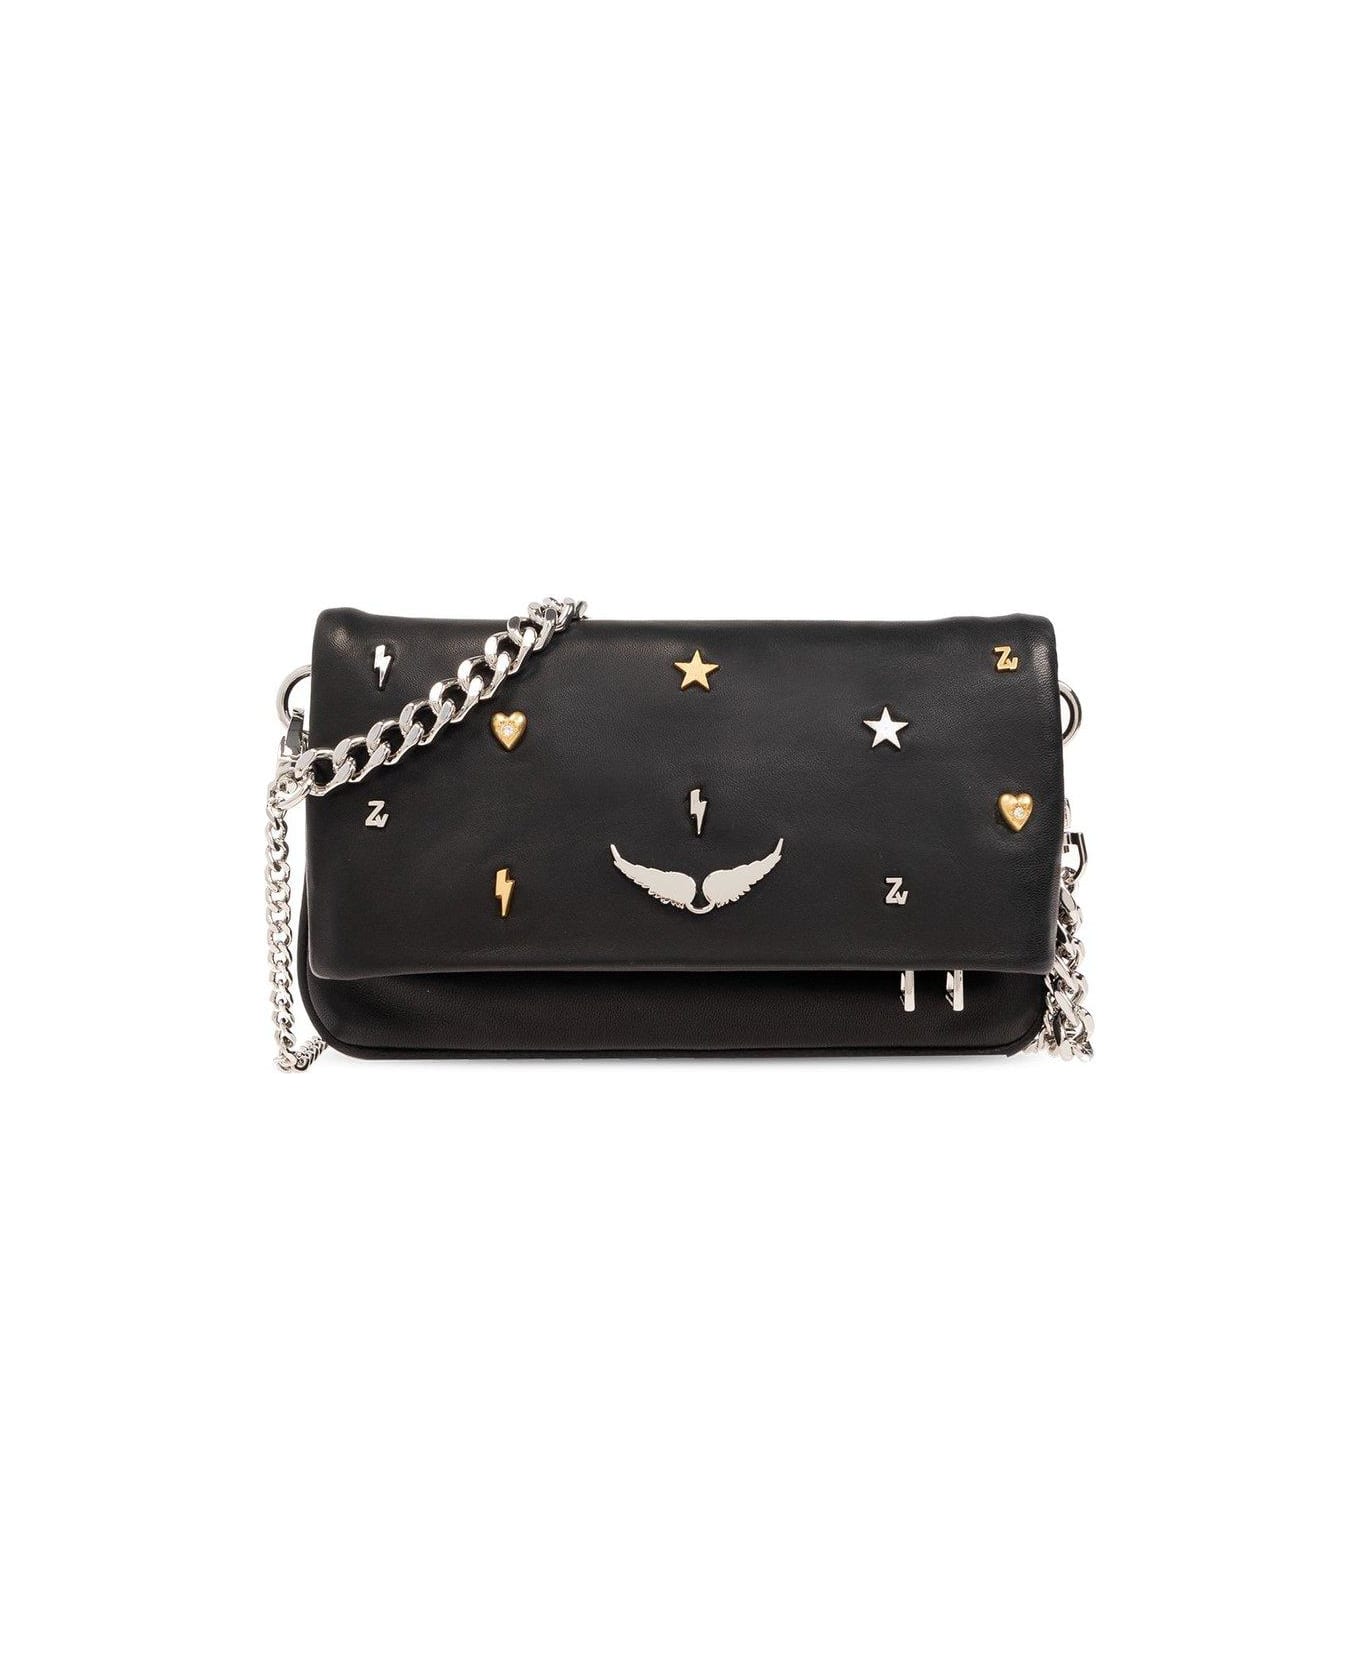 Zadig & Voltaire Rock Nano Lucky Charms Clutch Bag - Black